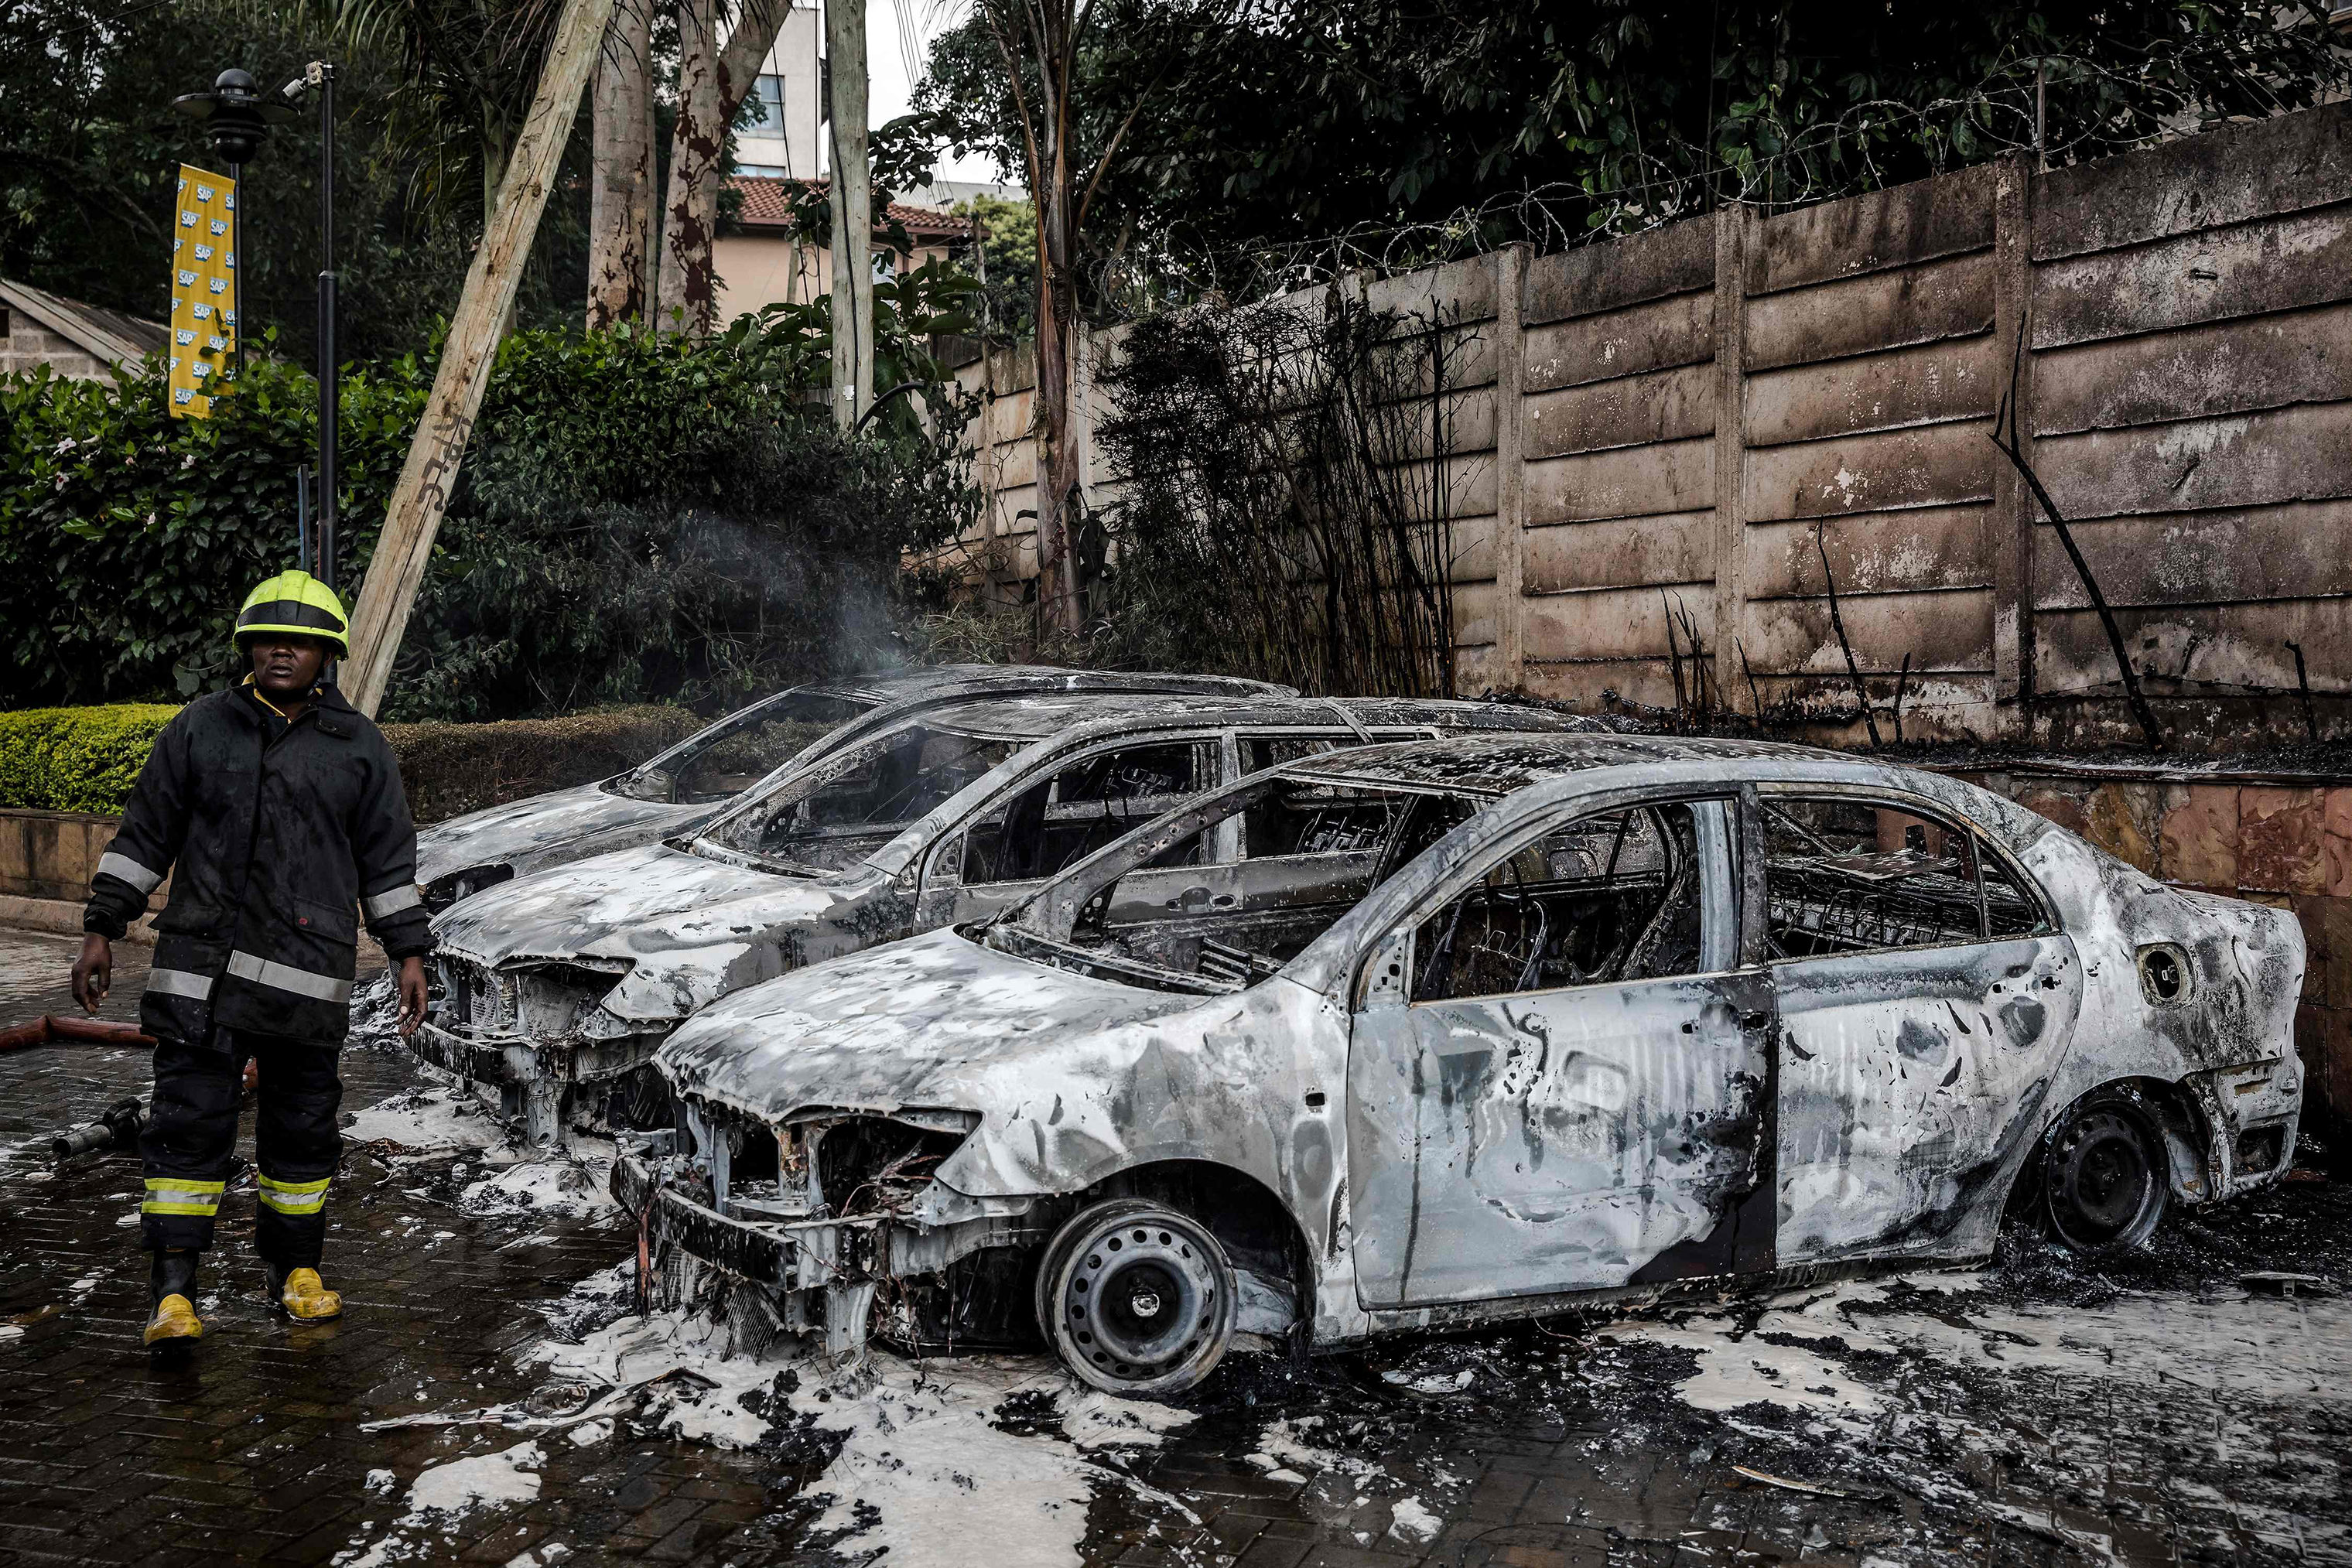 A firefighter stands next to the wreckage of cars in Nairobi's Westlands area. (Luis Tato—AFP/Getty Images)